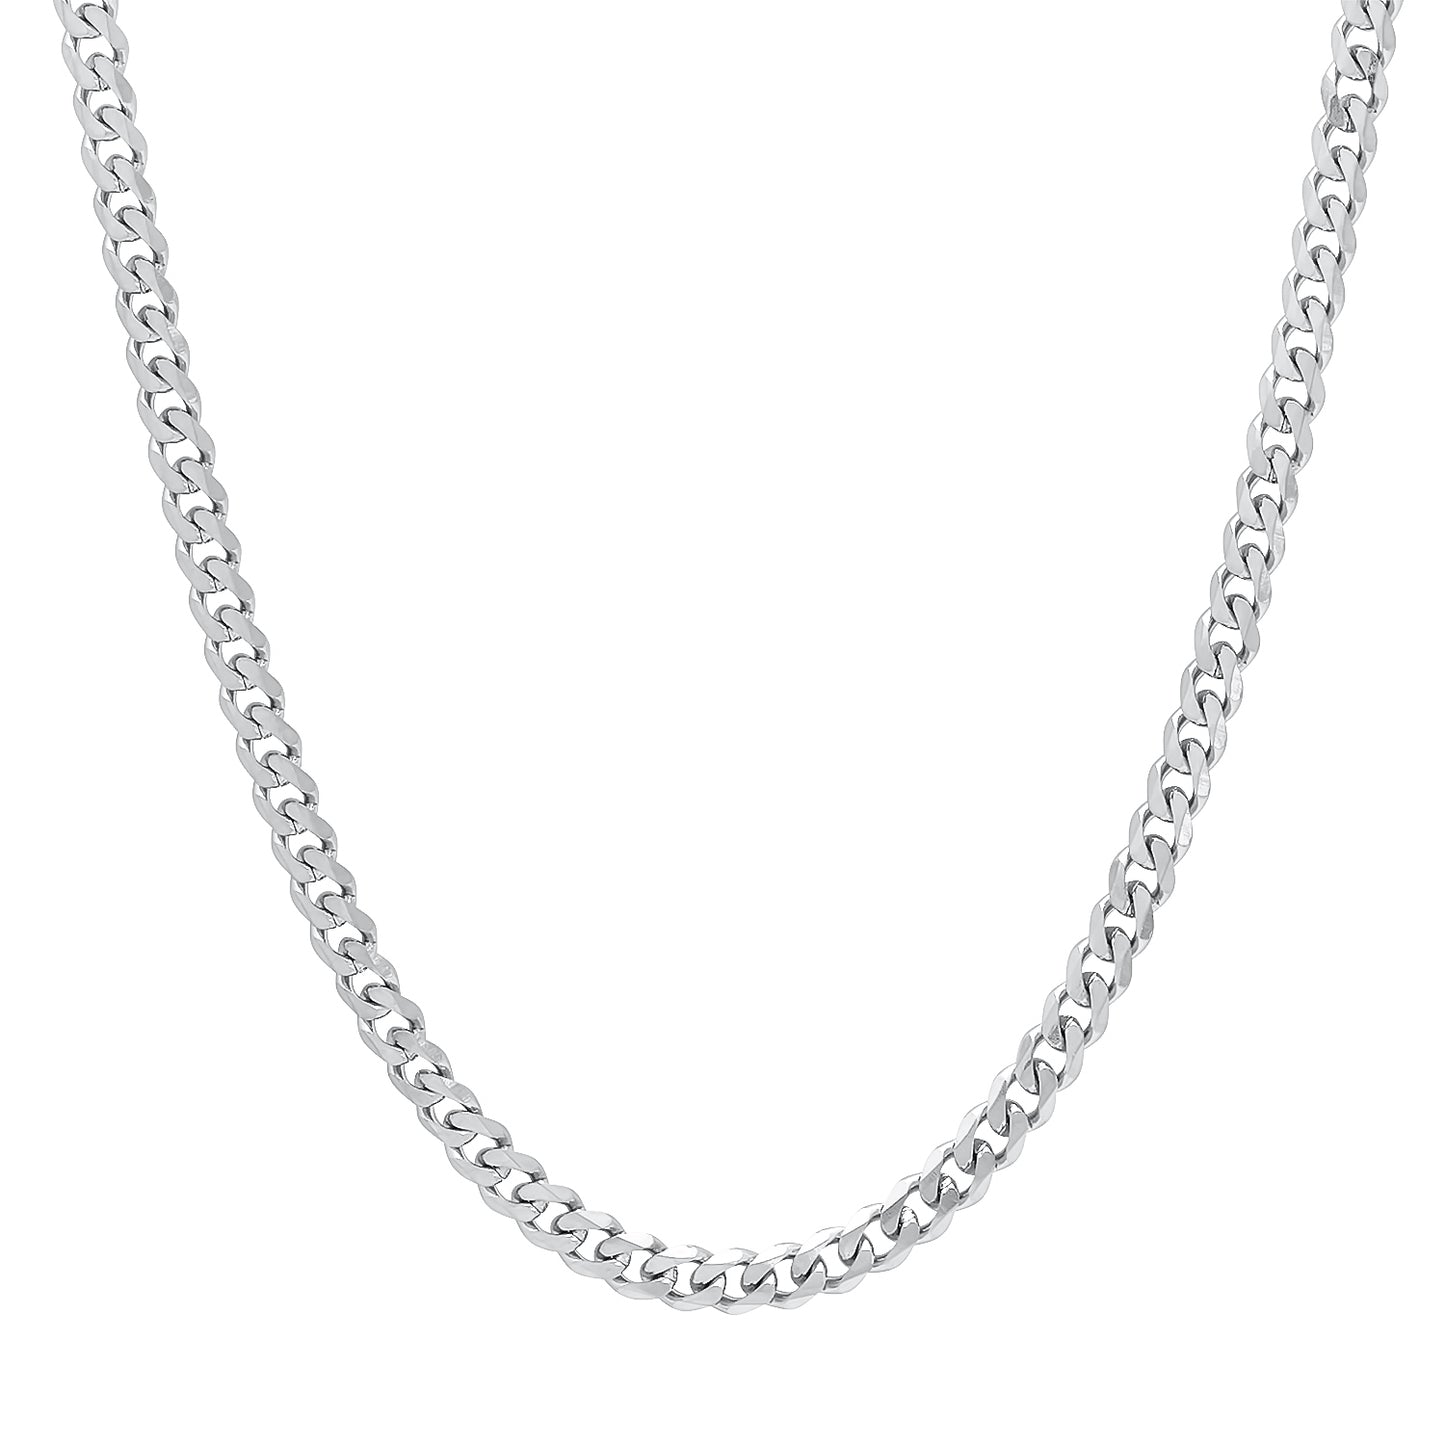 3.5mm High-Polished Stainless Steel Beveled Curb Chain Necklace, 20'-30' (SKU: ST-SSCRB100)